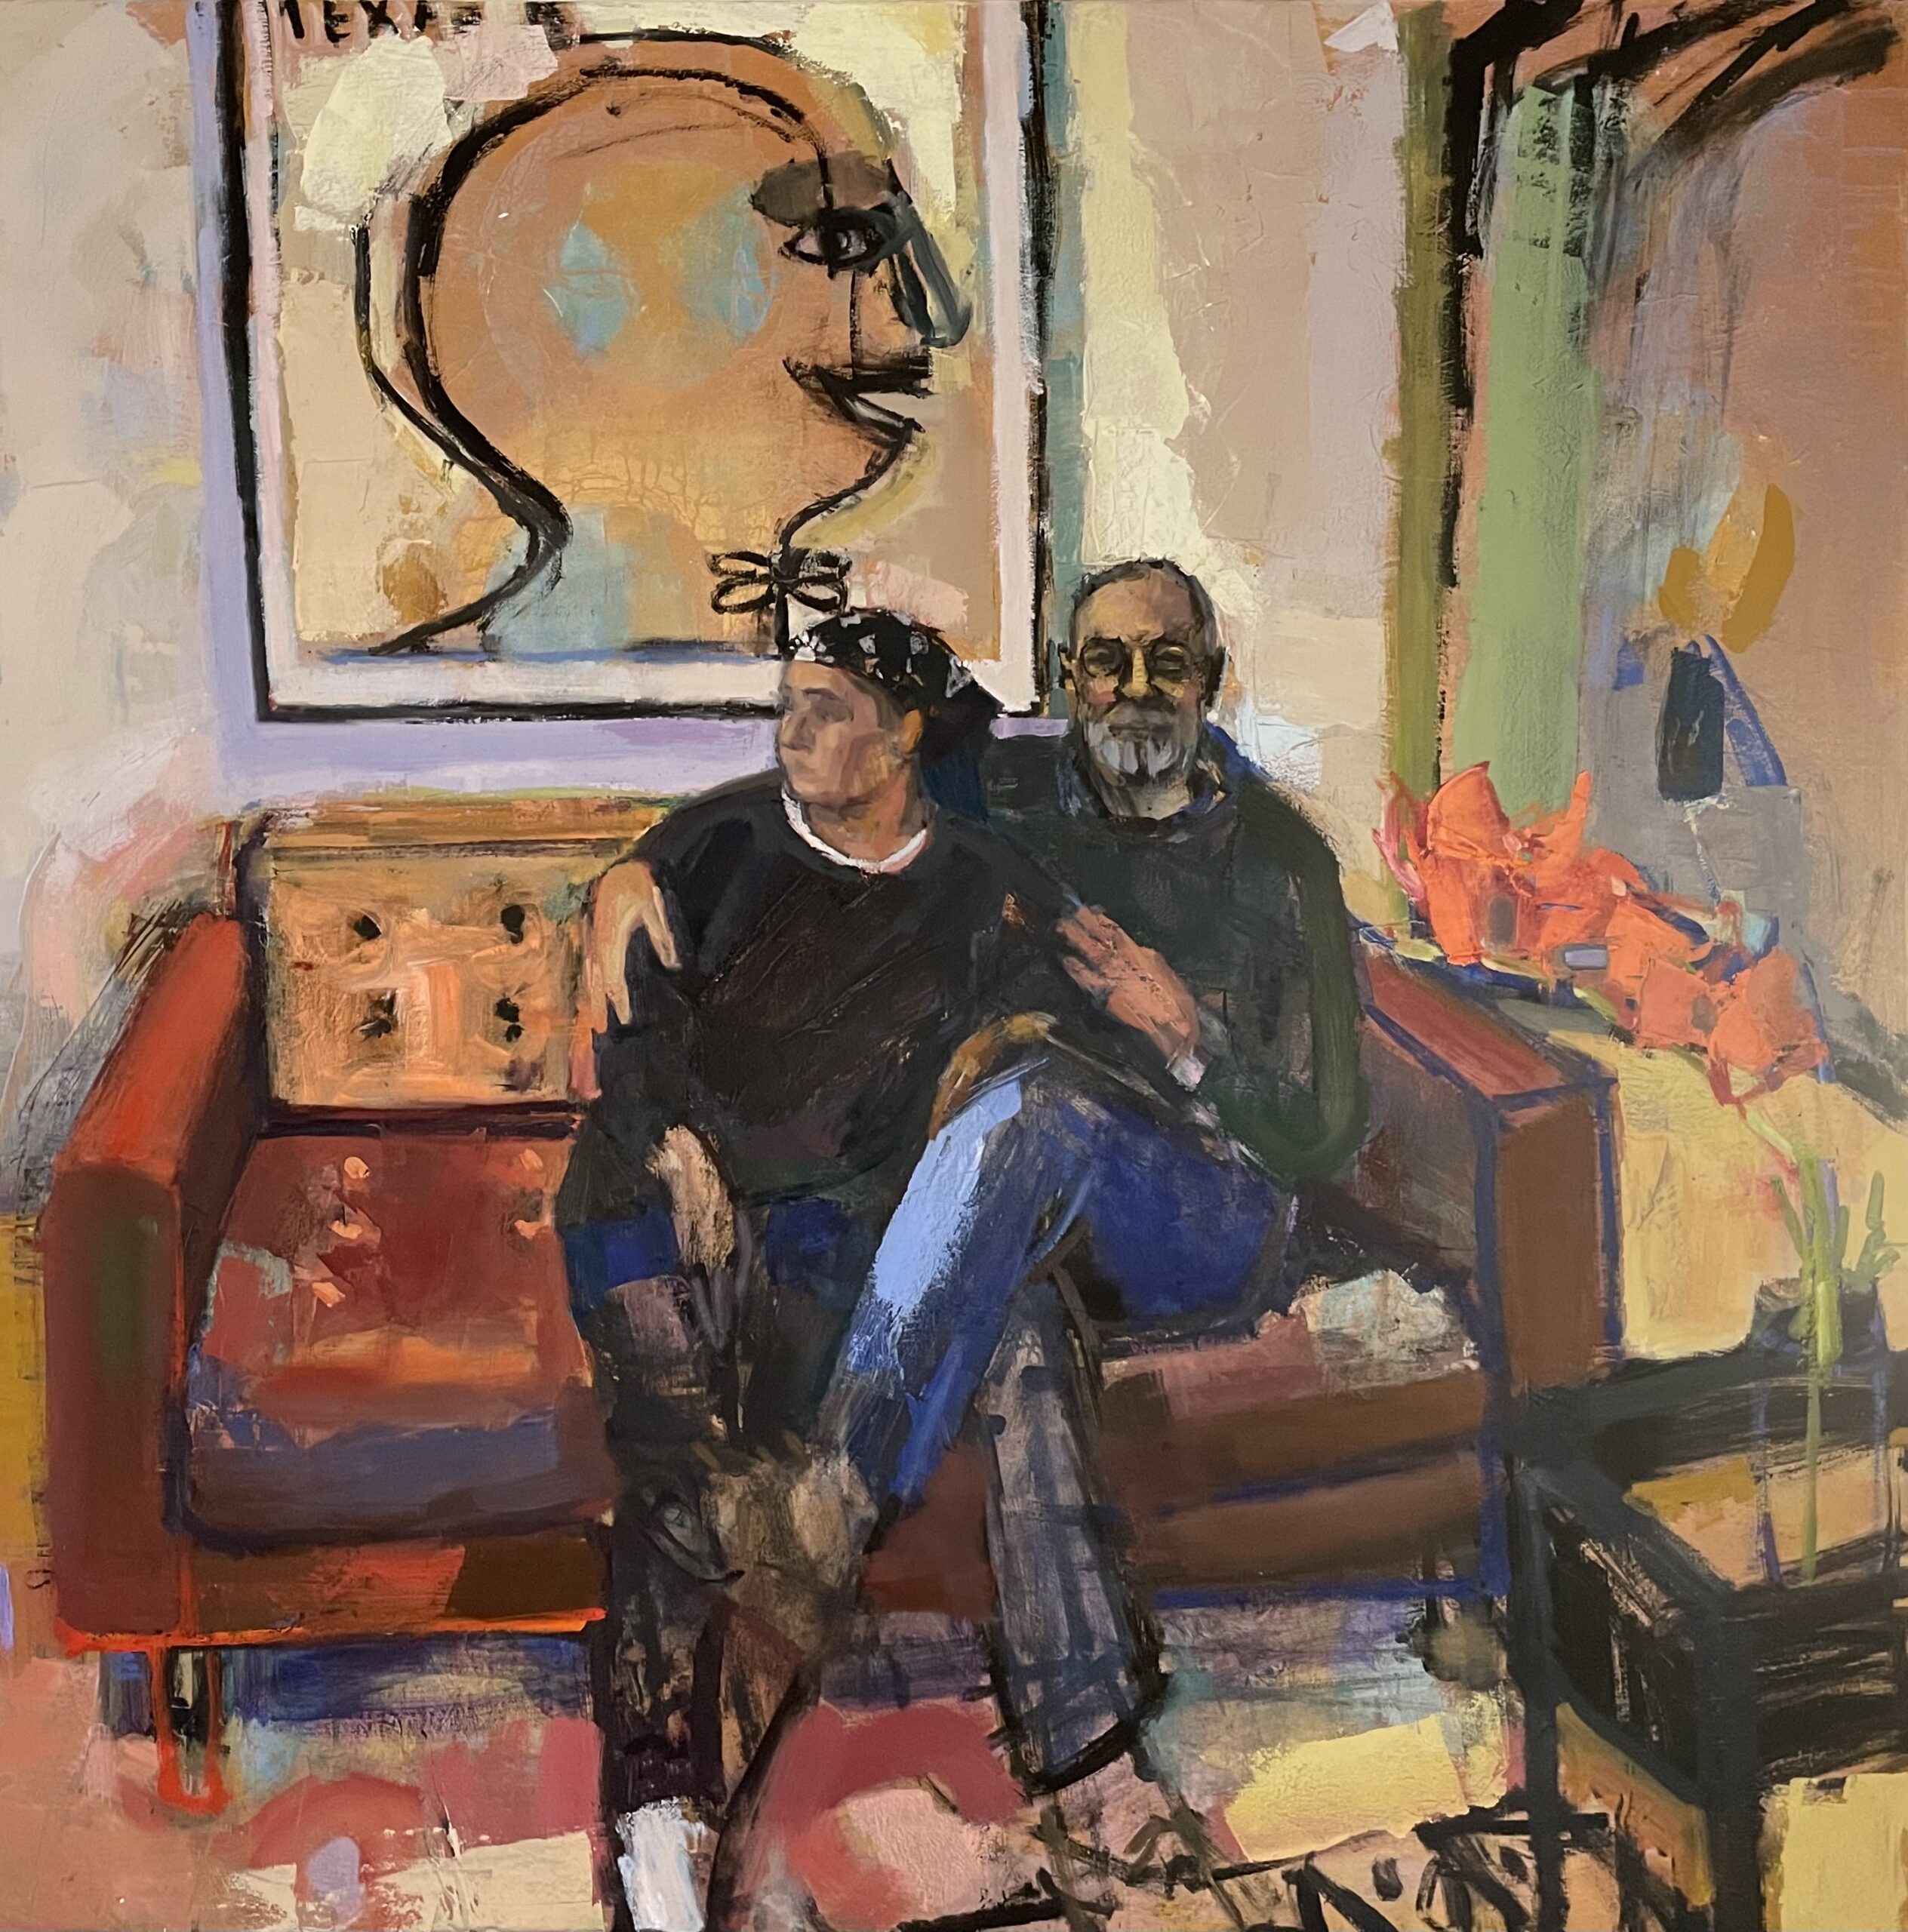 'Barry And Michele Under A Bruce Lee Webb Painting', Julie Karpodini, Oil on canvas, 100 x 100 cm